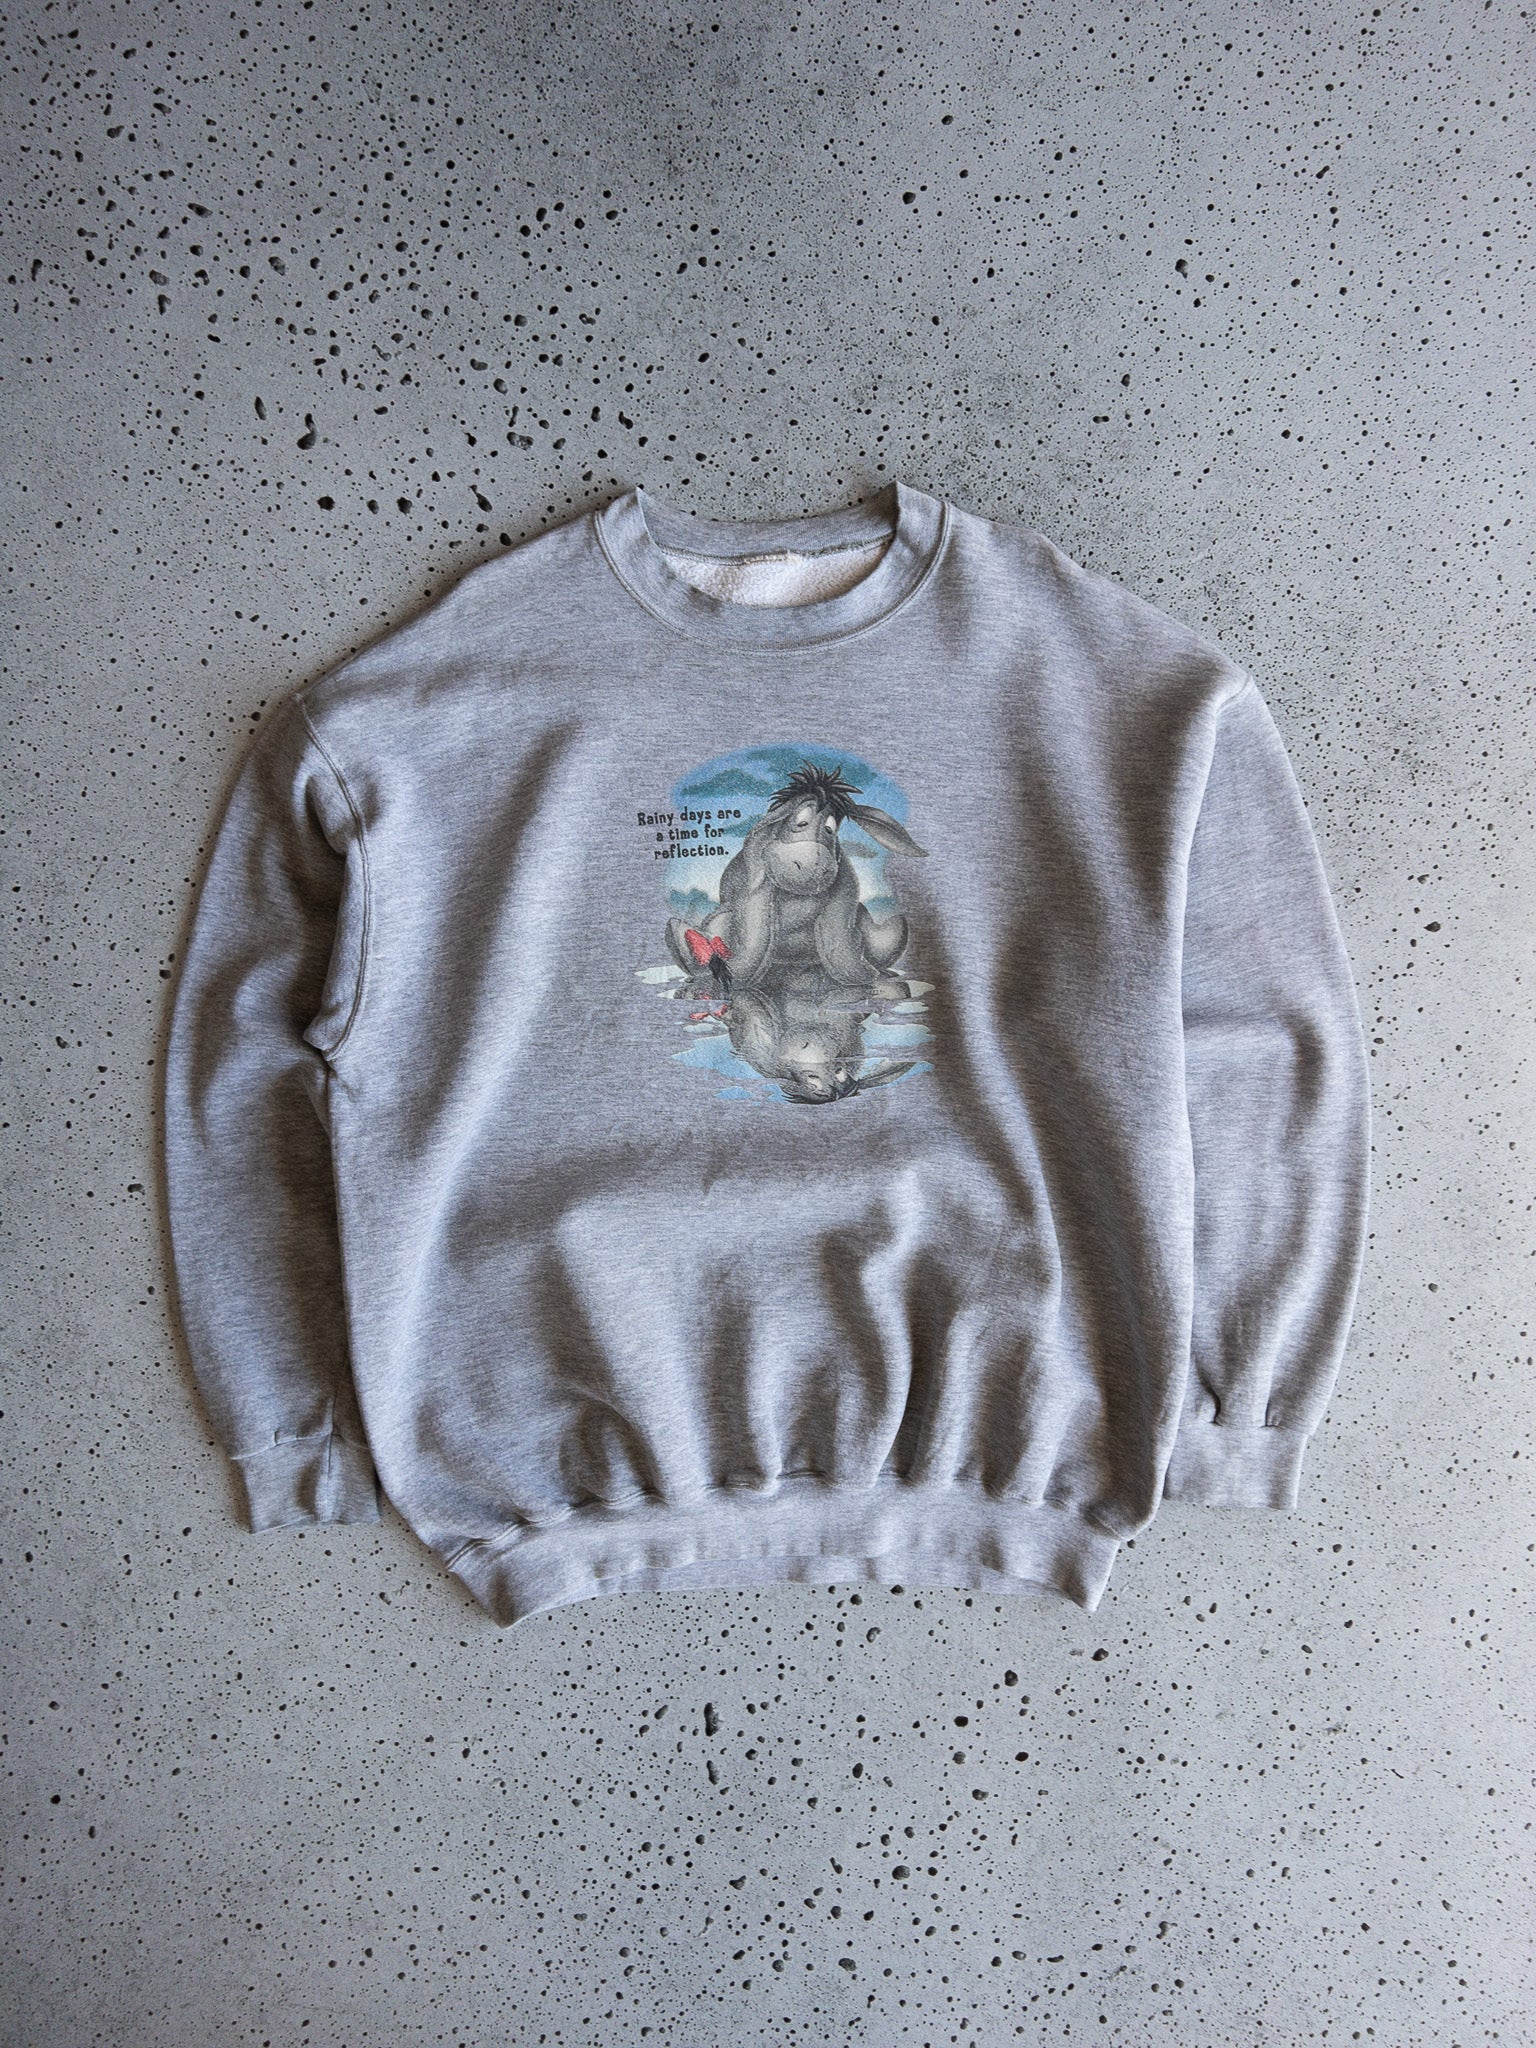 Vintage Eeyore 'Rainy Days Are Time For Reflection' Sweatshirt (XL)